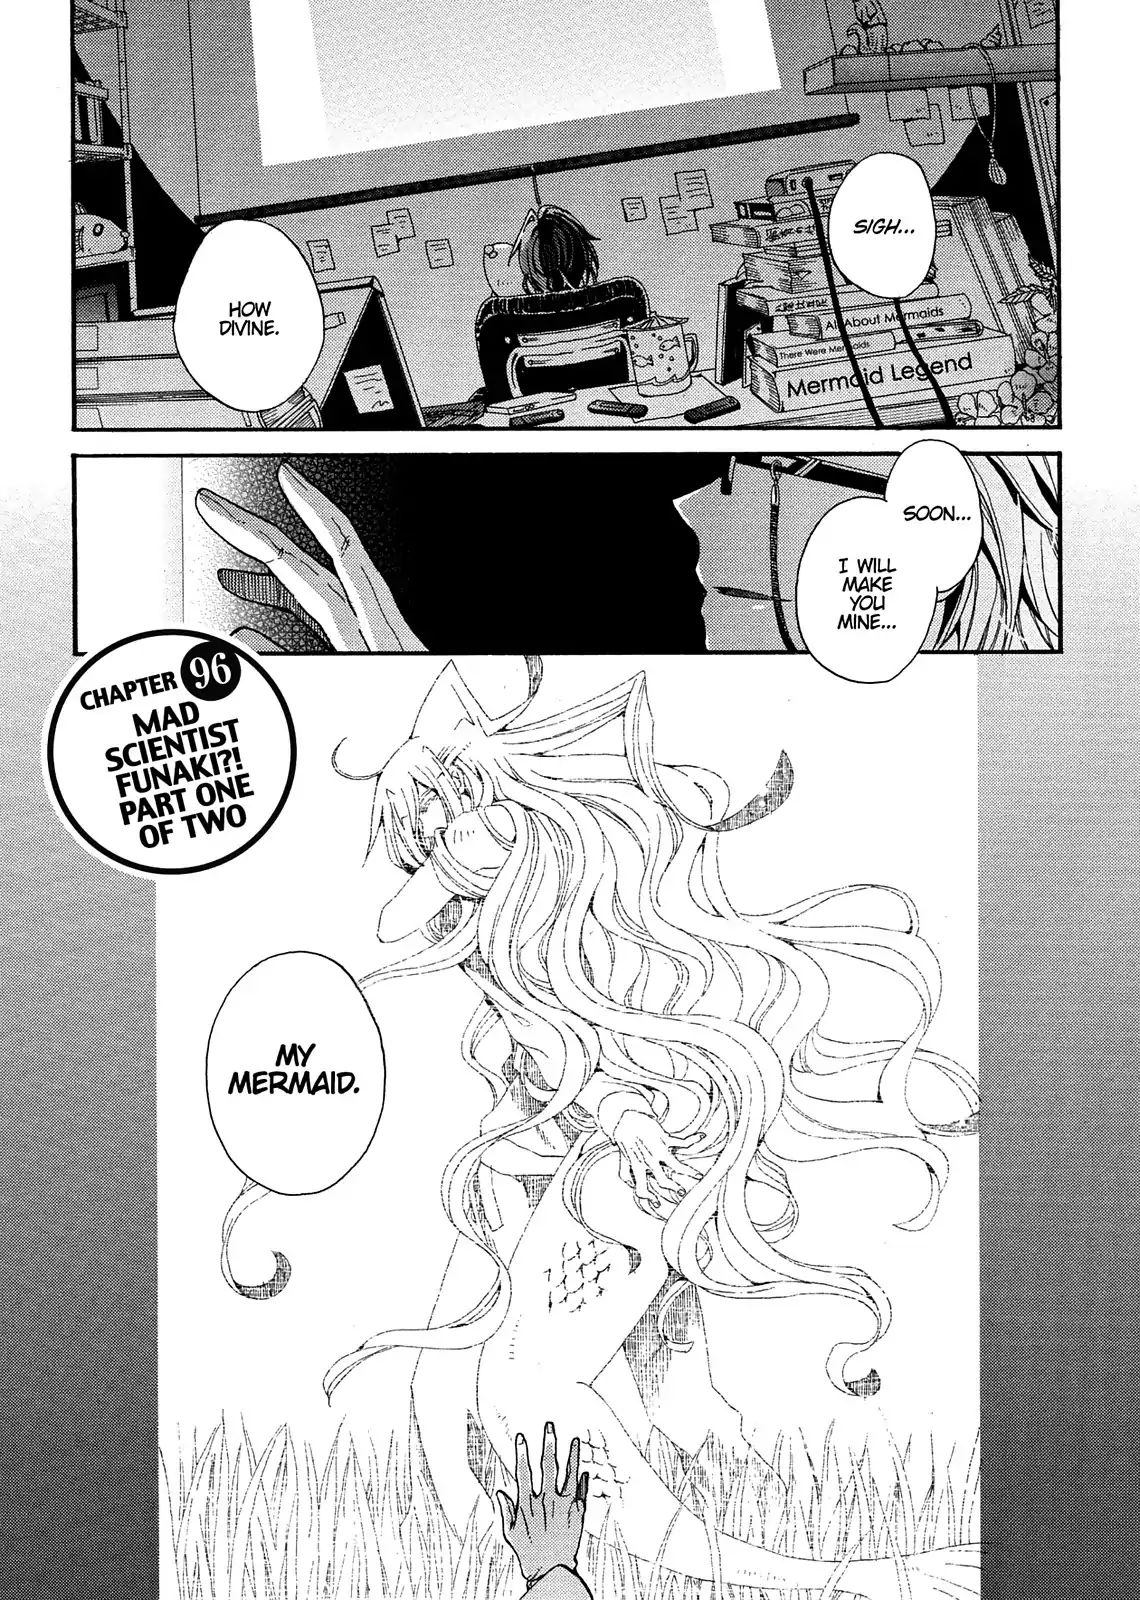 Orenchi No Furo Jijou Vol.7 Chapter 96: Mad Scientist Funaki?! Part One Of Two - Picture 1